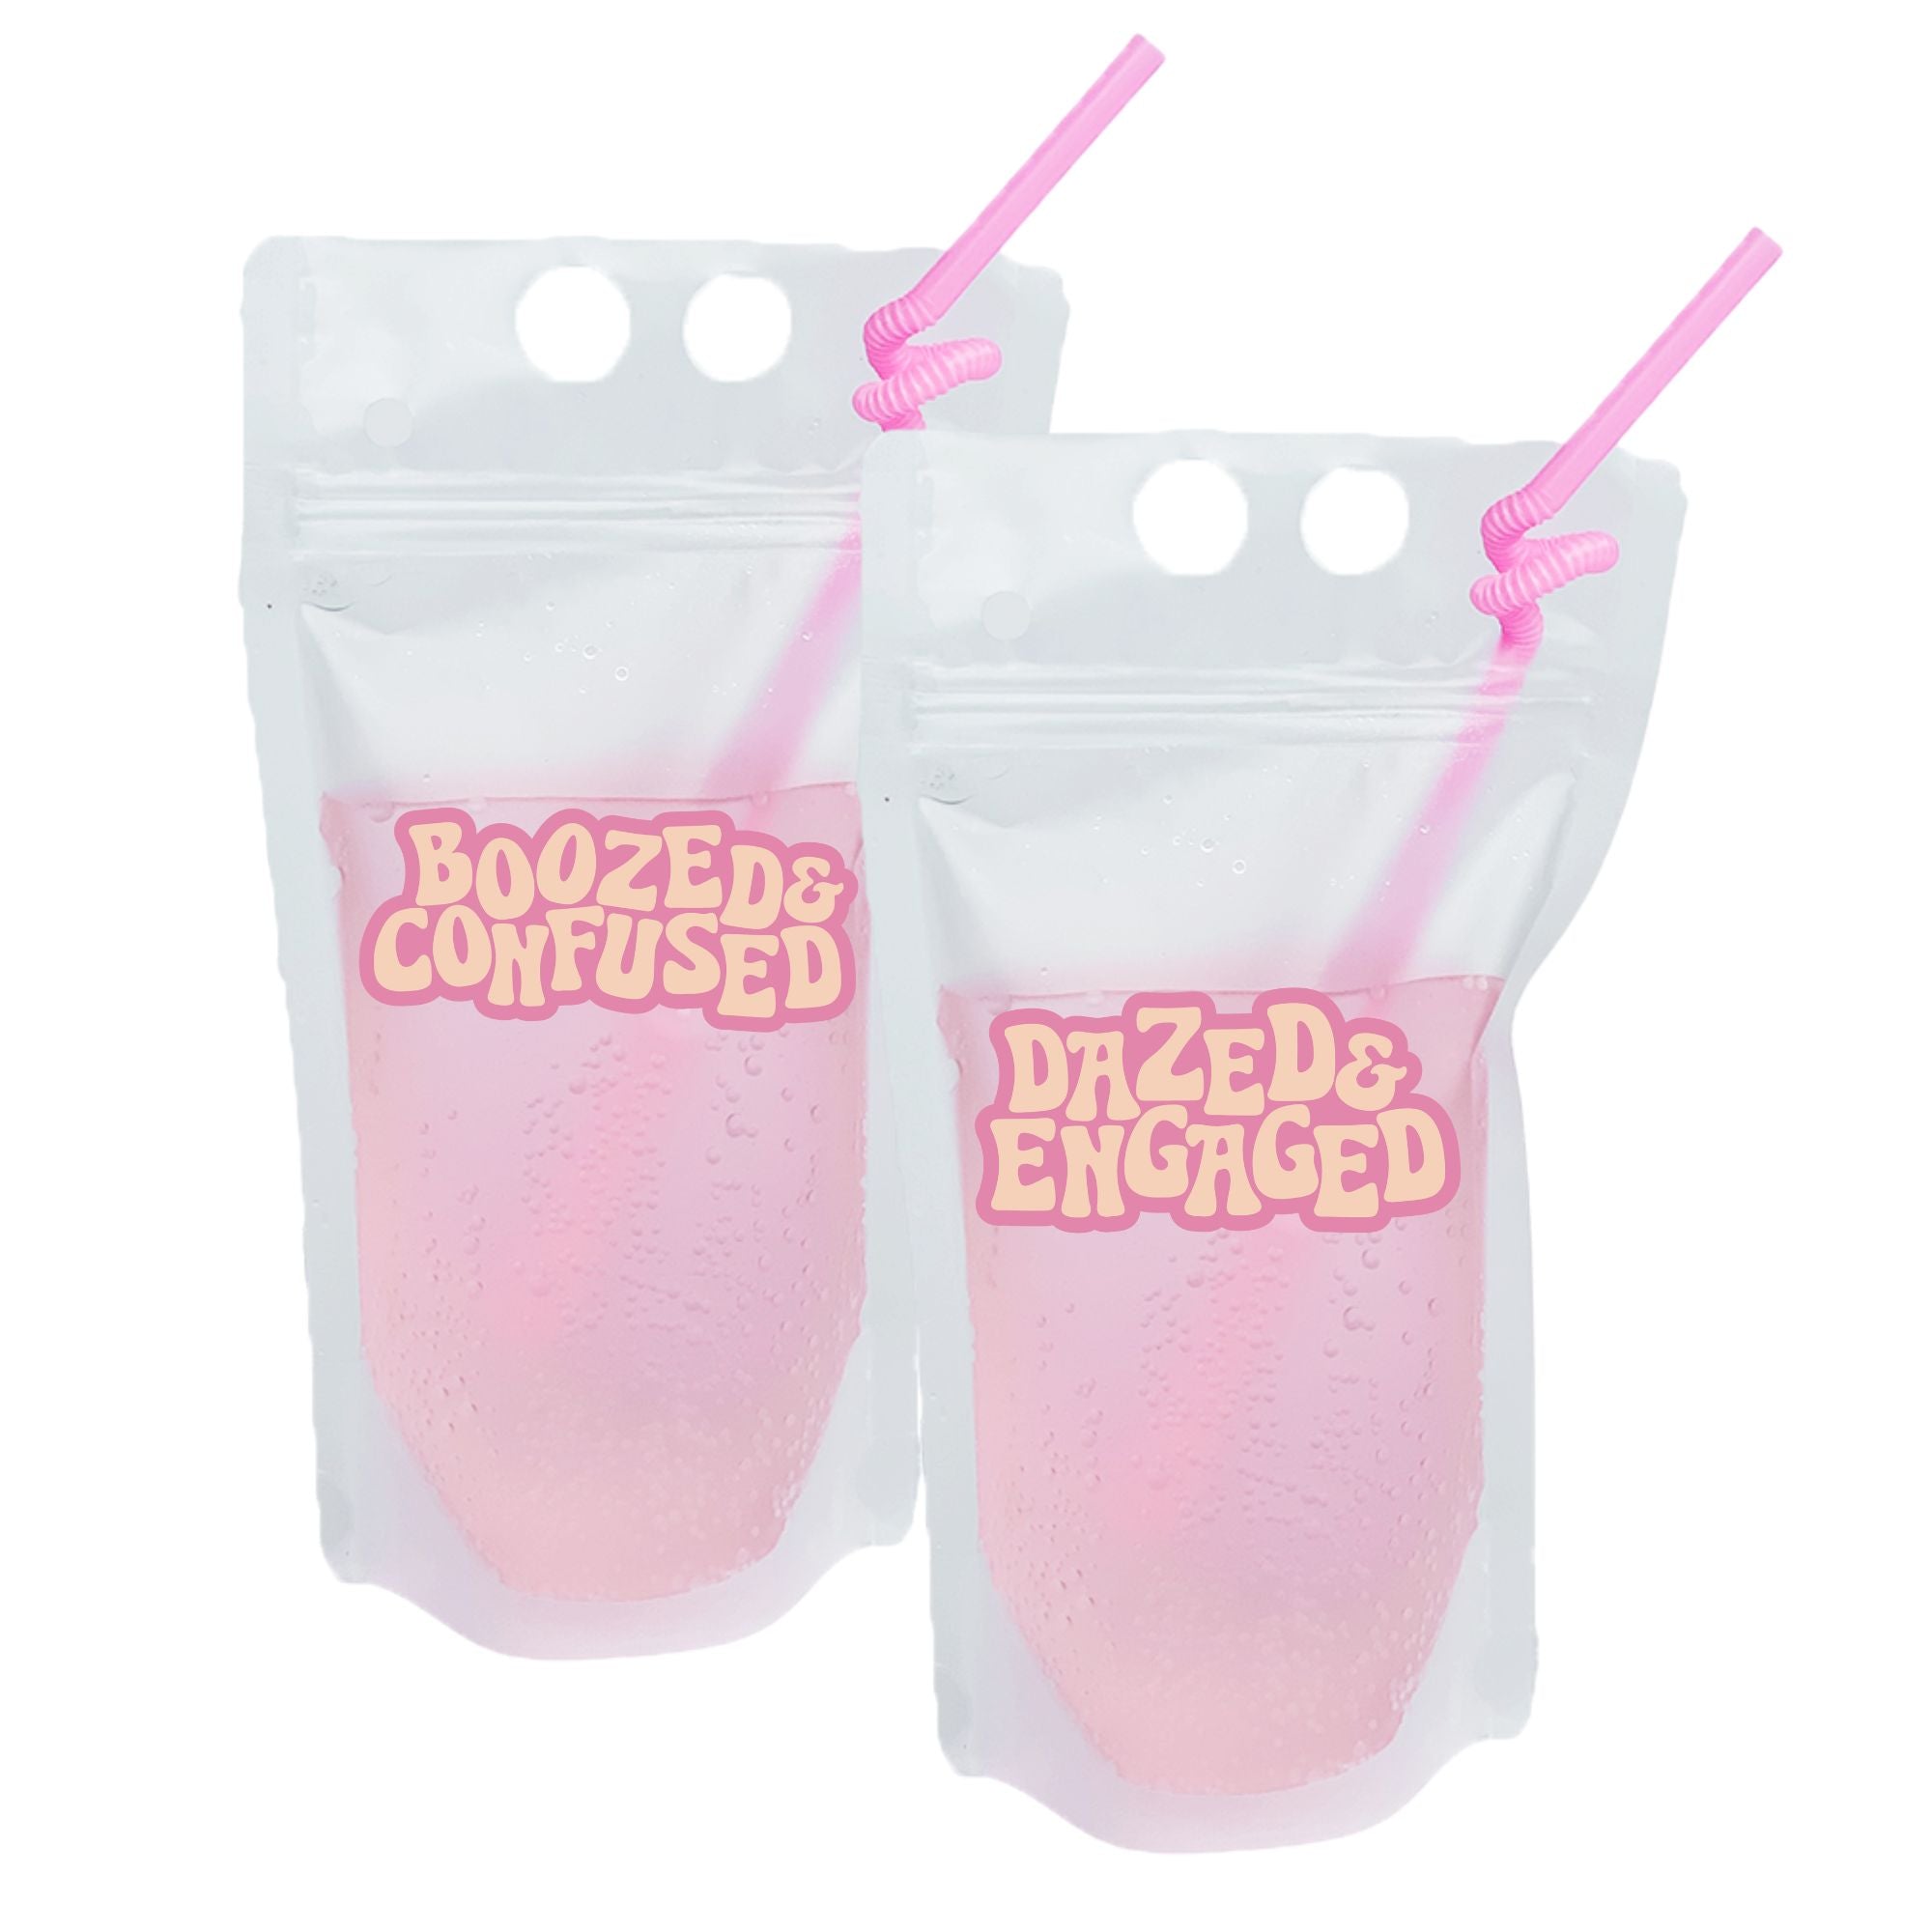 Dazed & Engaged / Boozed & Confused Party Pouch - Sprinkled With Pink #bachelorette #custom #gifts